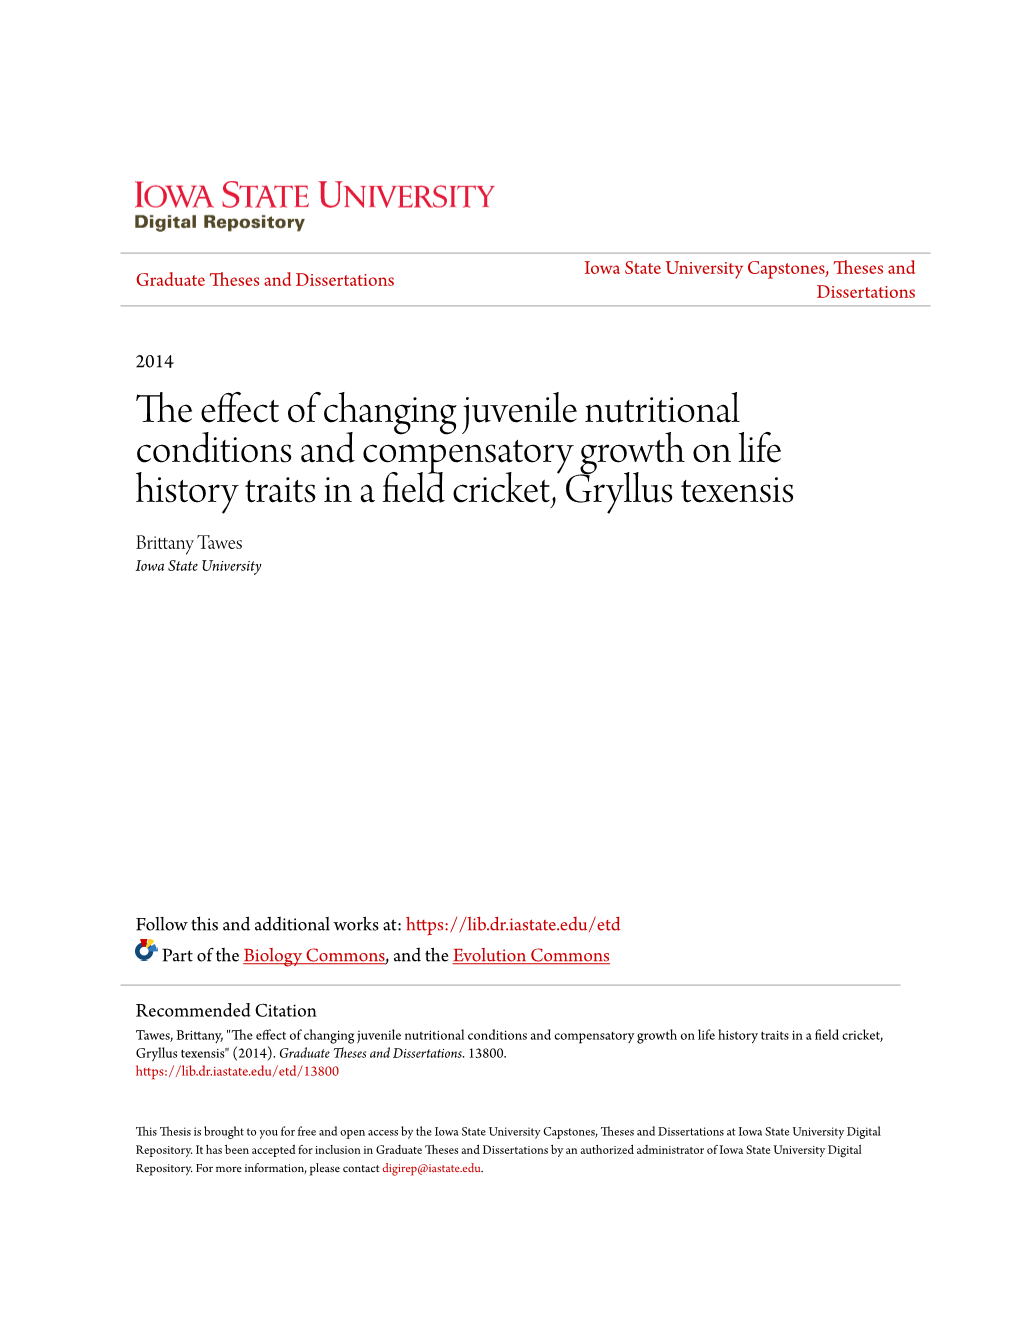 The Effect of Changing Juvenile Nutritional Conditions and Compensatory Growth on Life History Traits in a Field Cricket, Gryllu